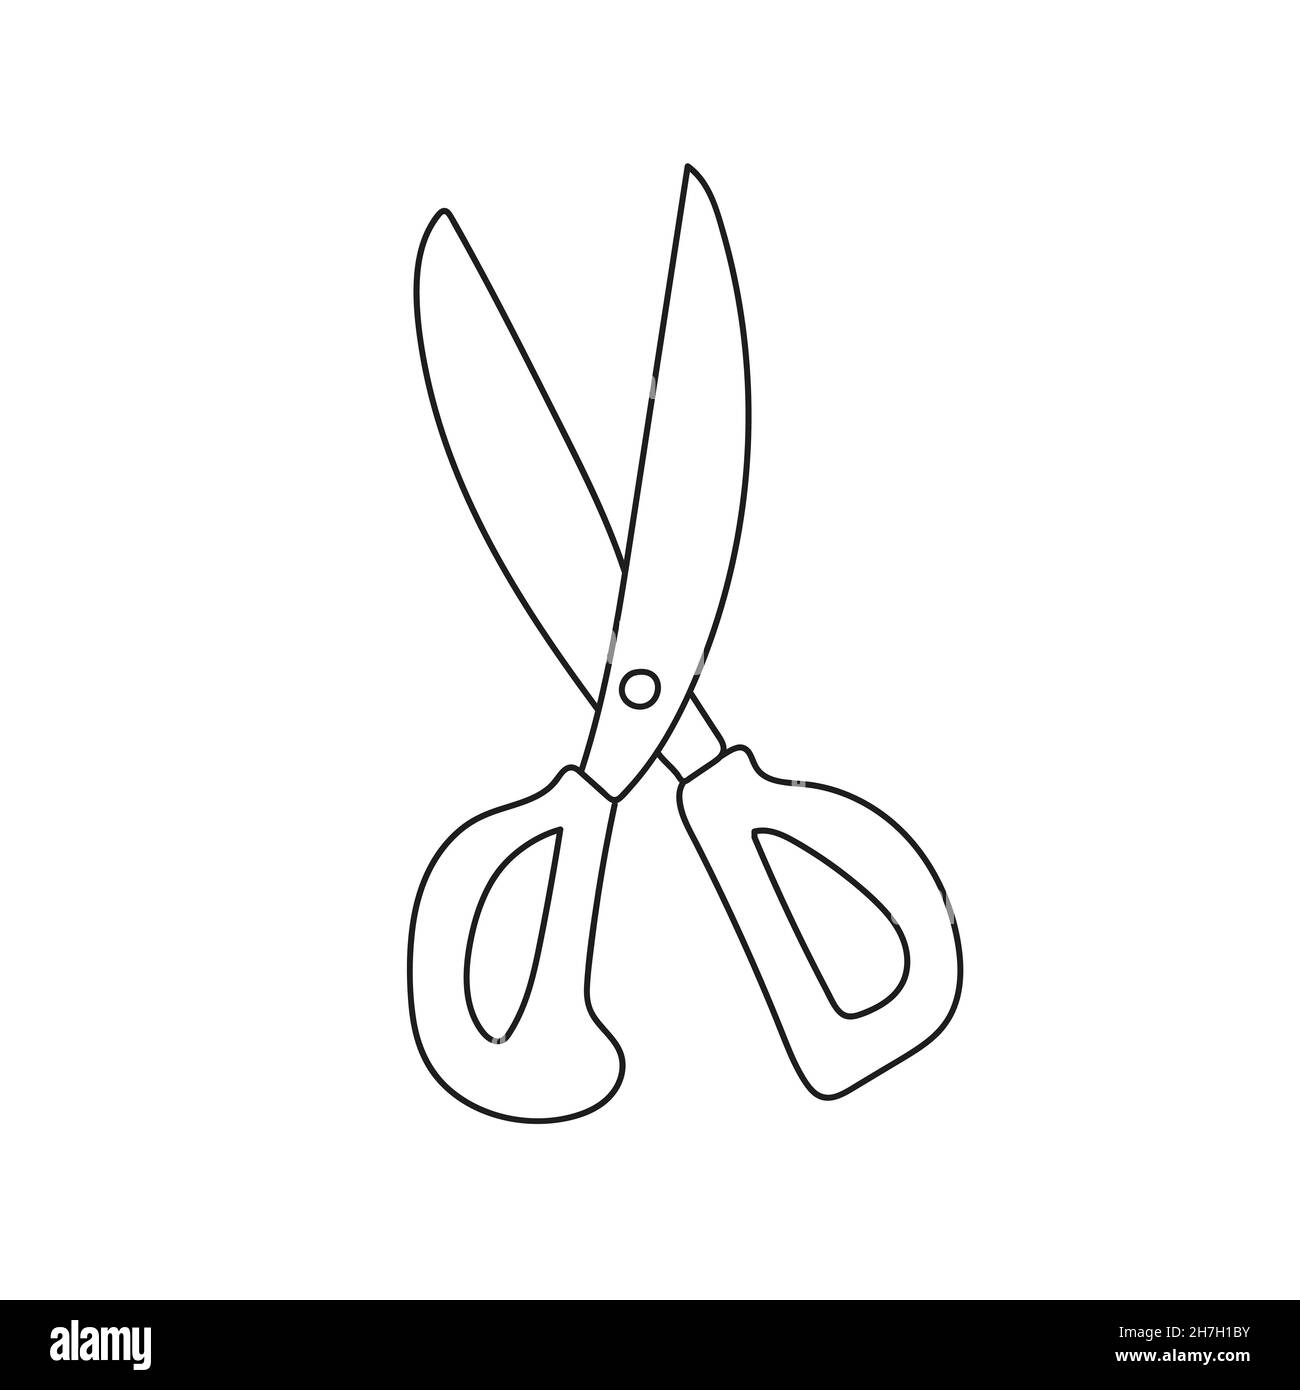 Simple coloring page outline scissors on a white background cartoon vector illustration of scissors for coloring pages stock vector image art